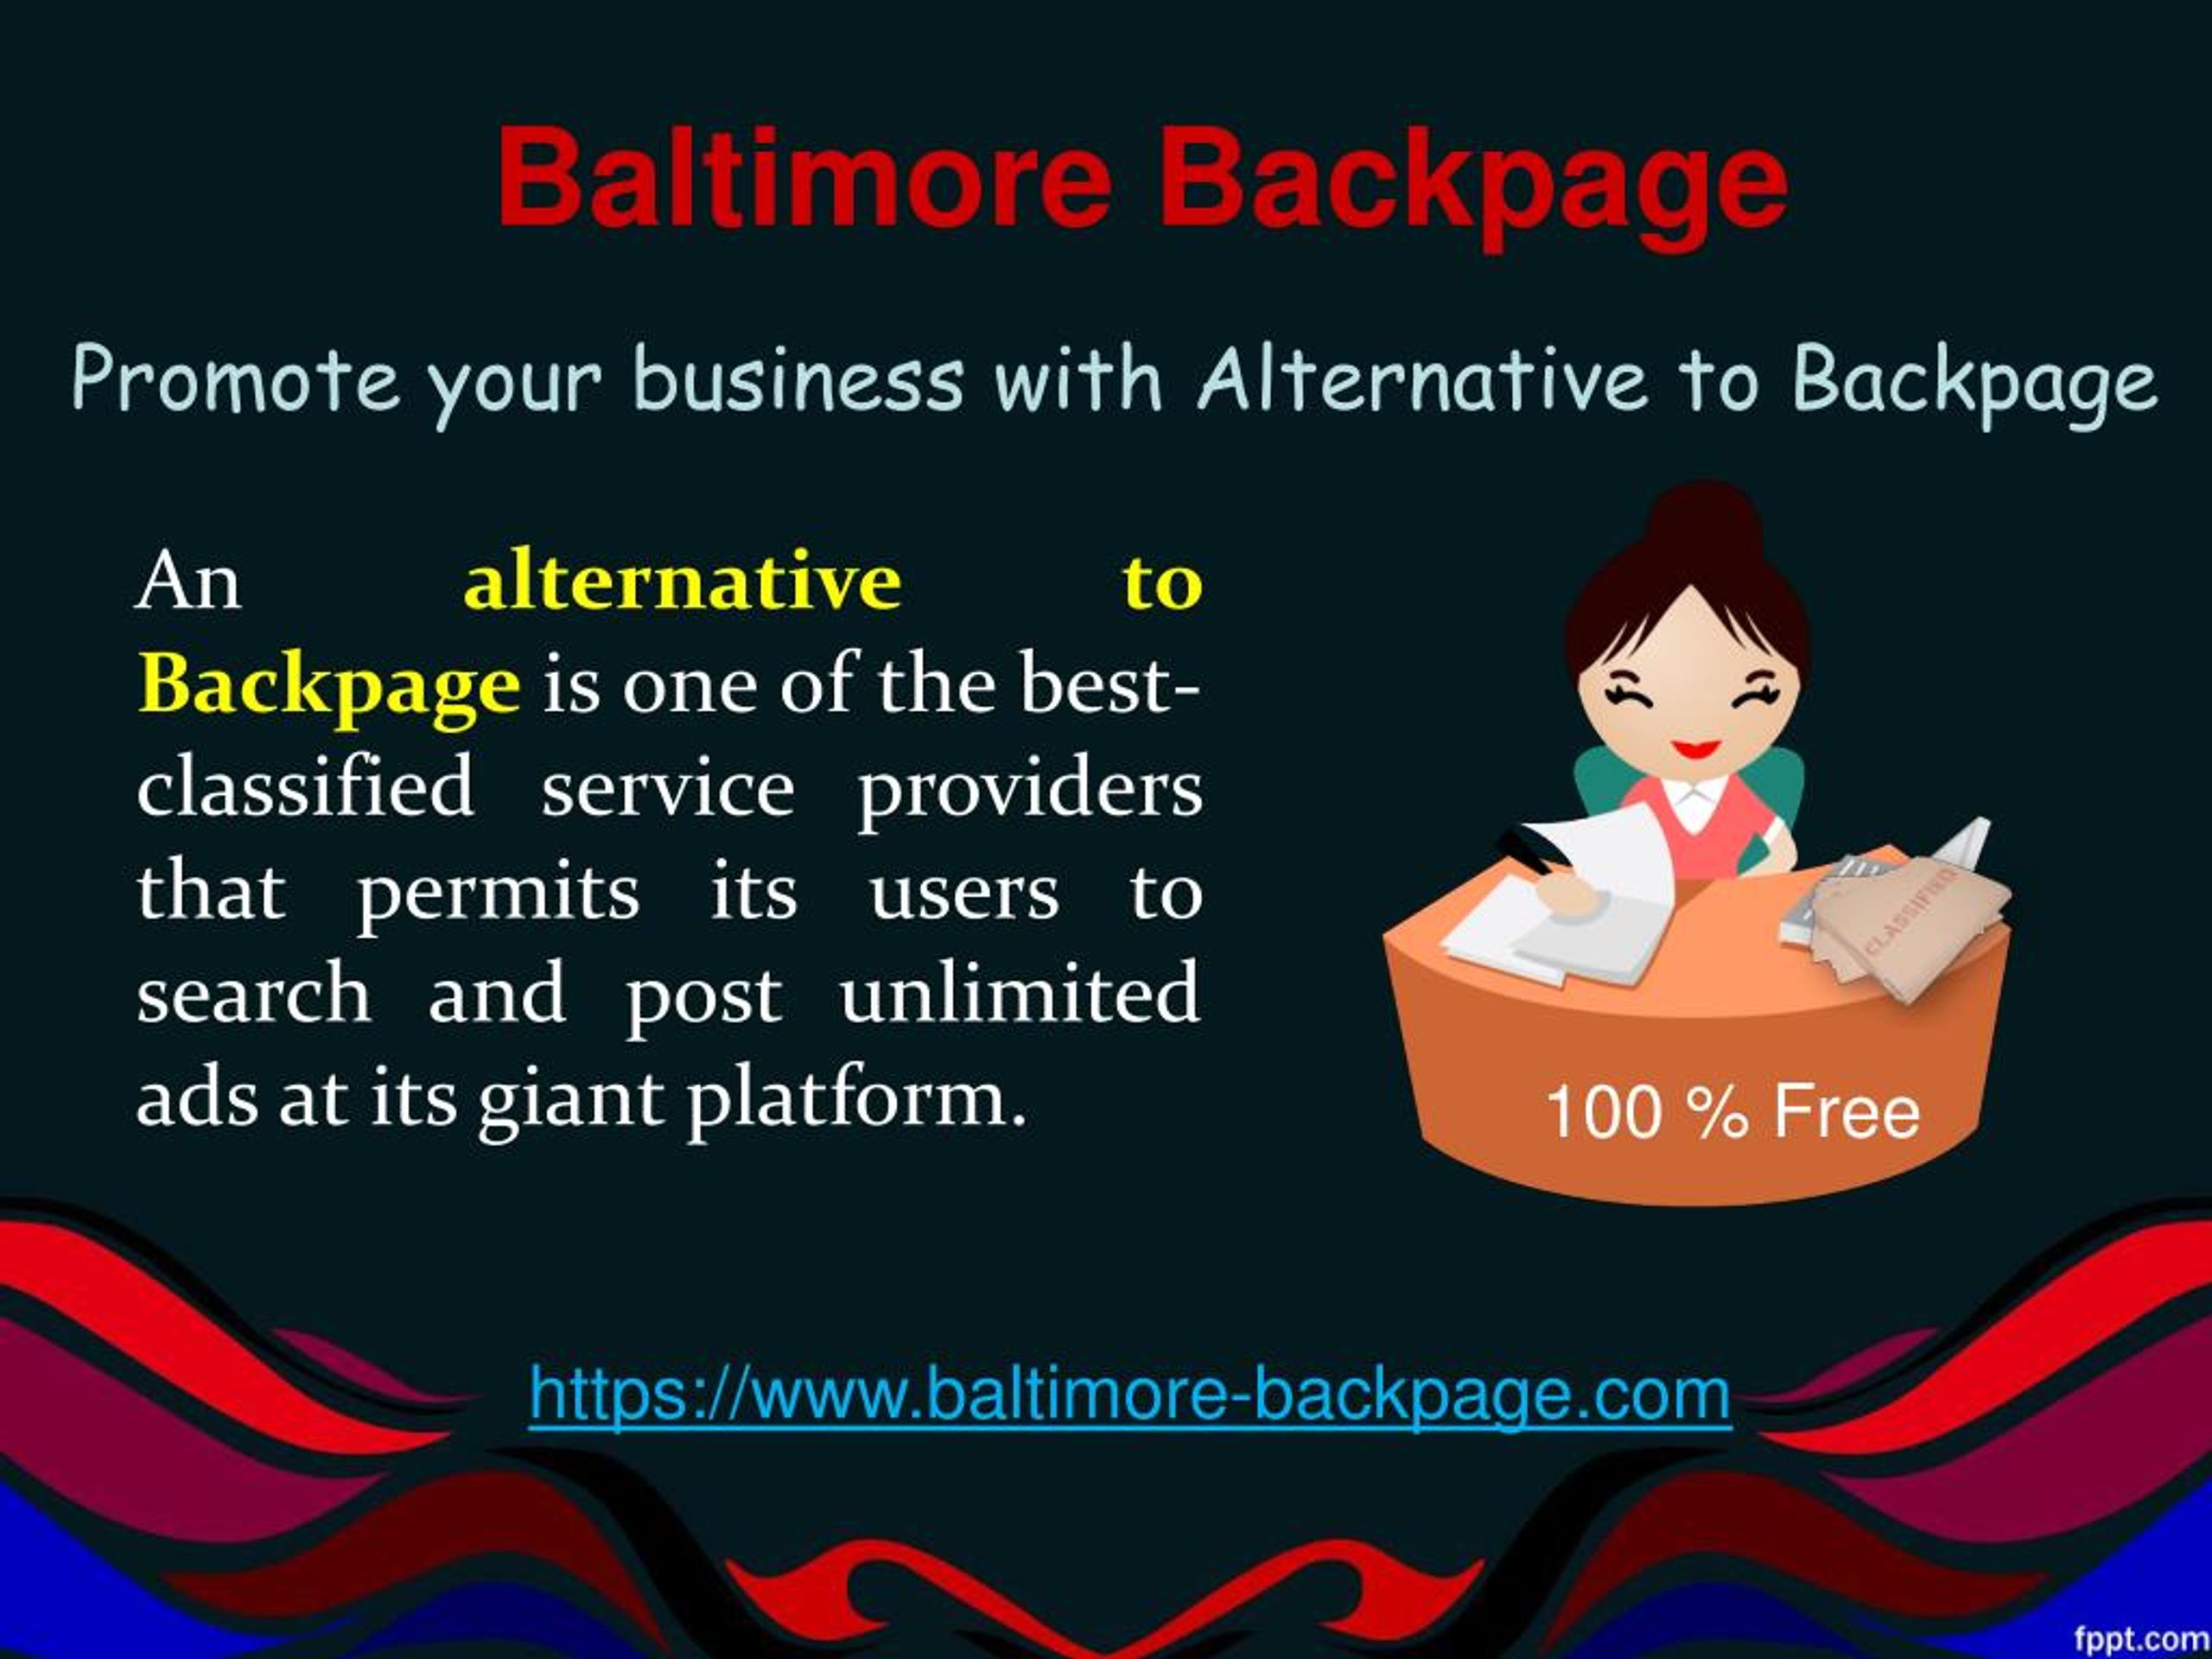 Www Backpage Baltimore